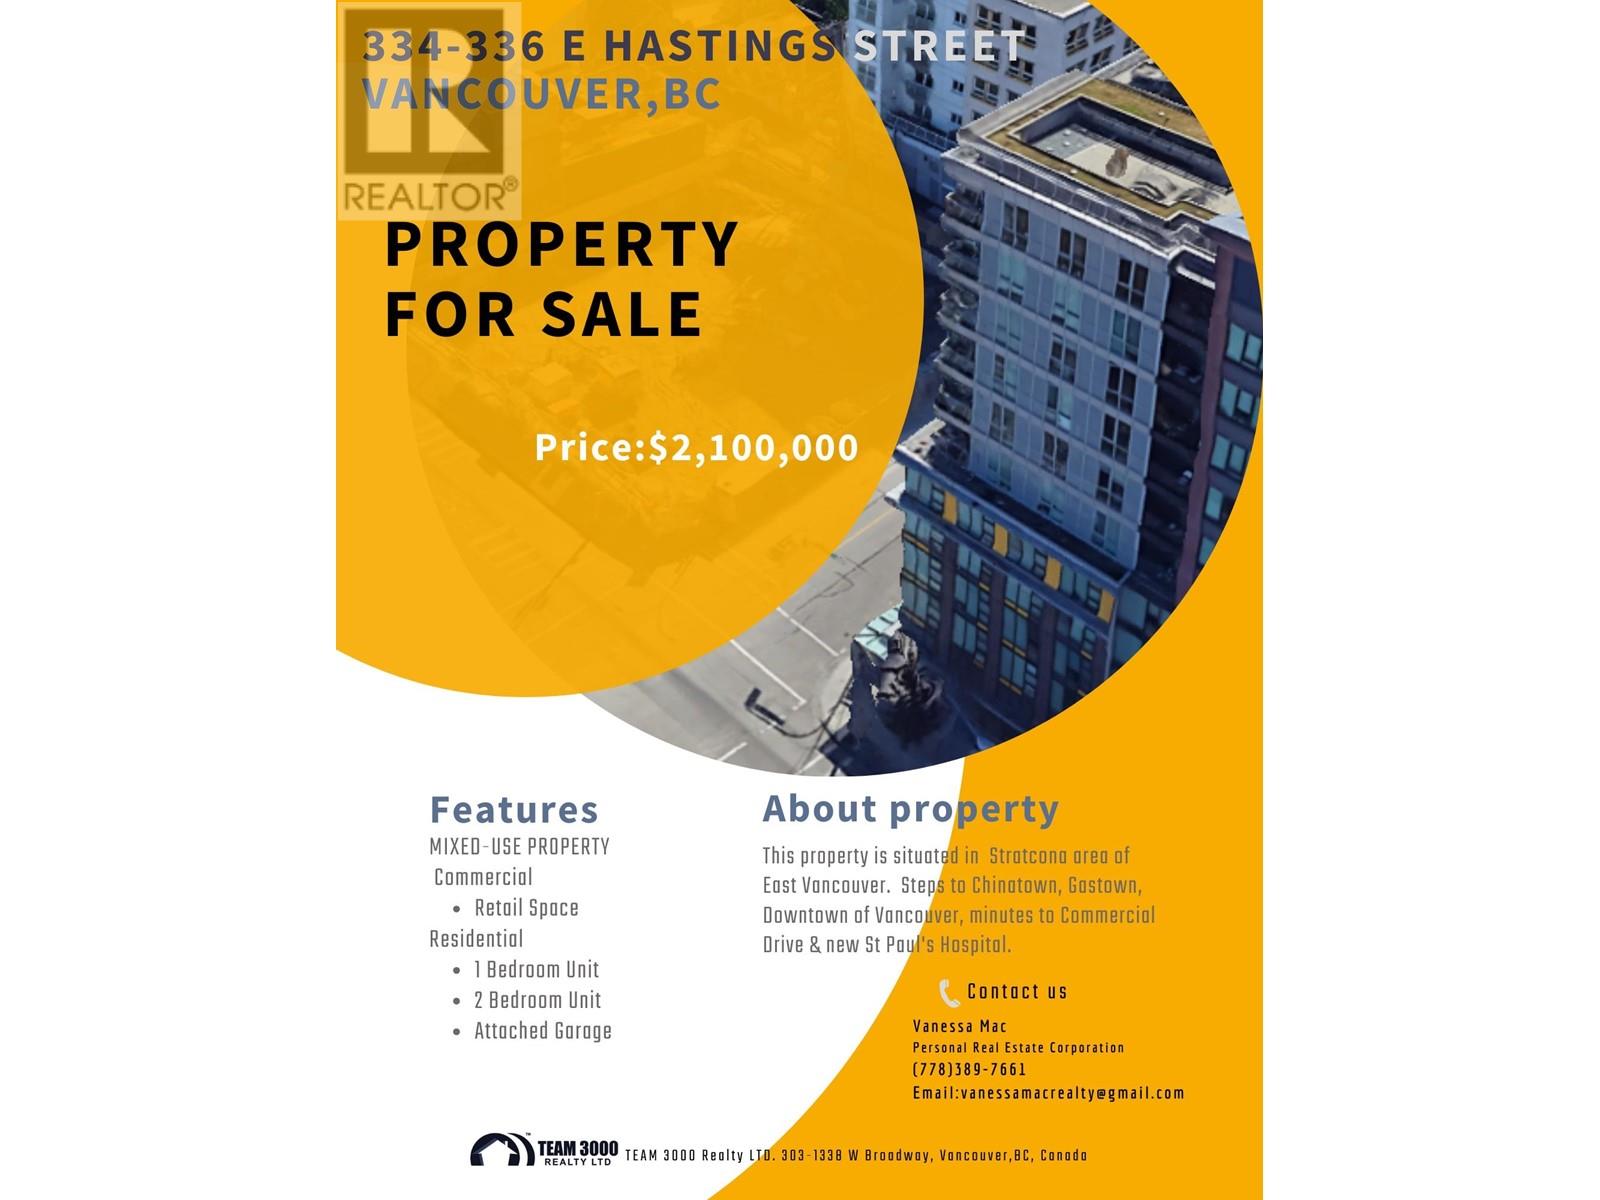 334 336 E HASTINGS STREET, Vancouver